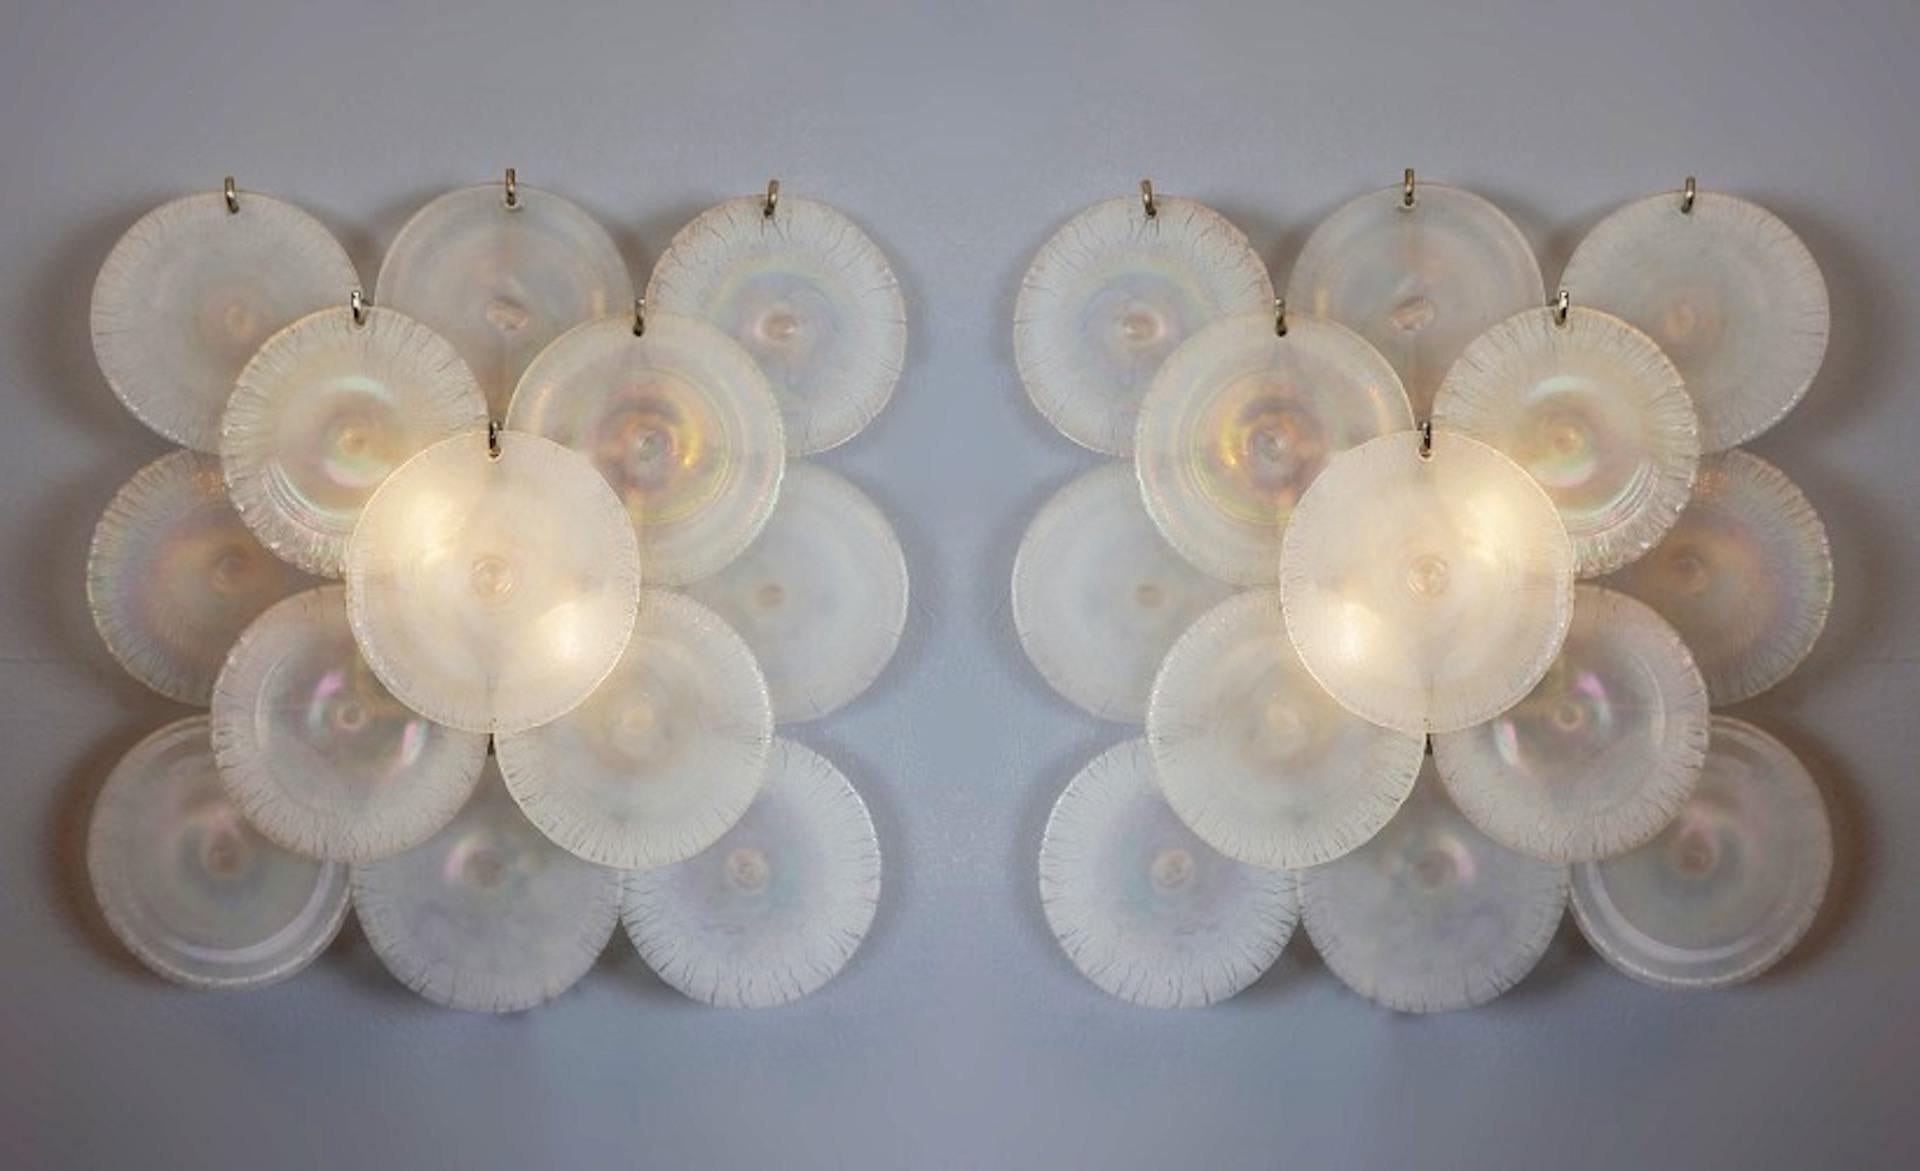 Pair of Carlo Nason wall lamps with murano glass discs - 1960s (2 pairs available).

The Italian designer Carlo Nason was born in 1935 in Murano, into a family of expert glassmakers. His father, Vincenzo Nason, ran the famous glass company